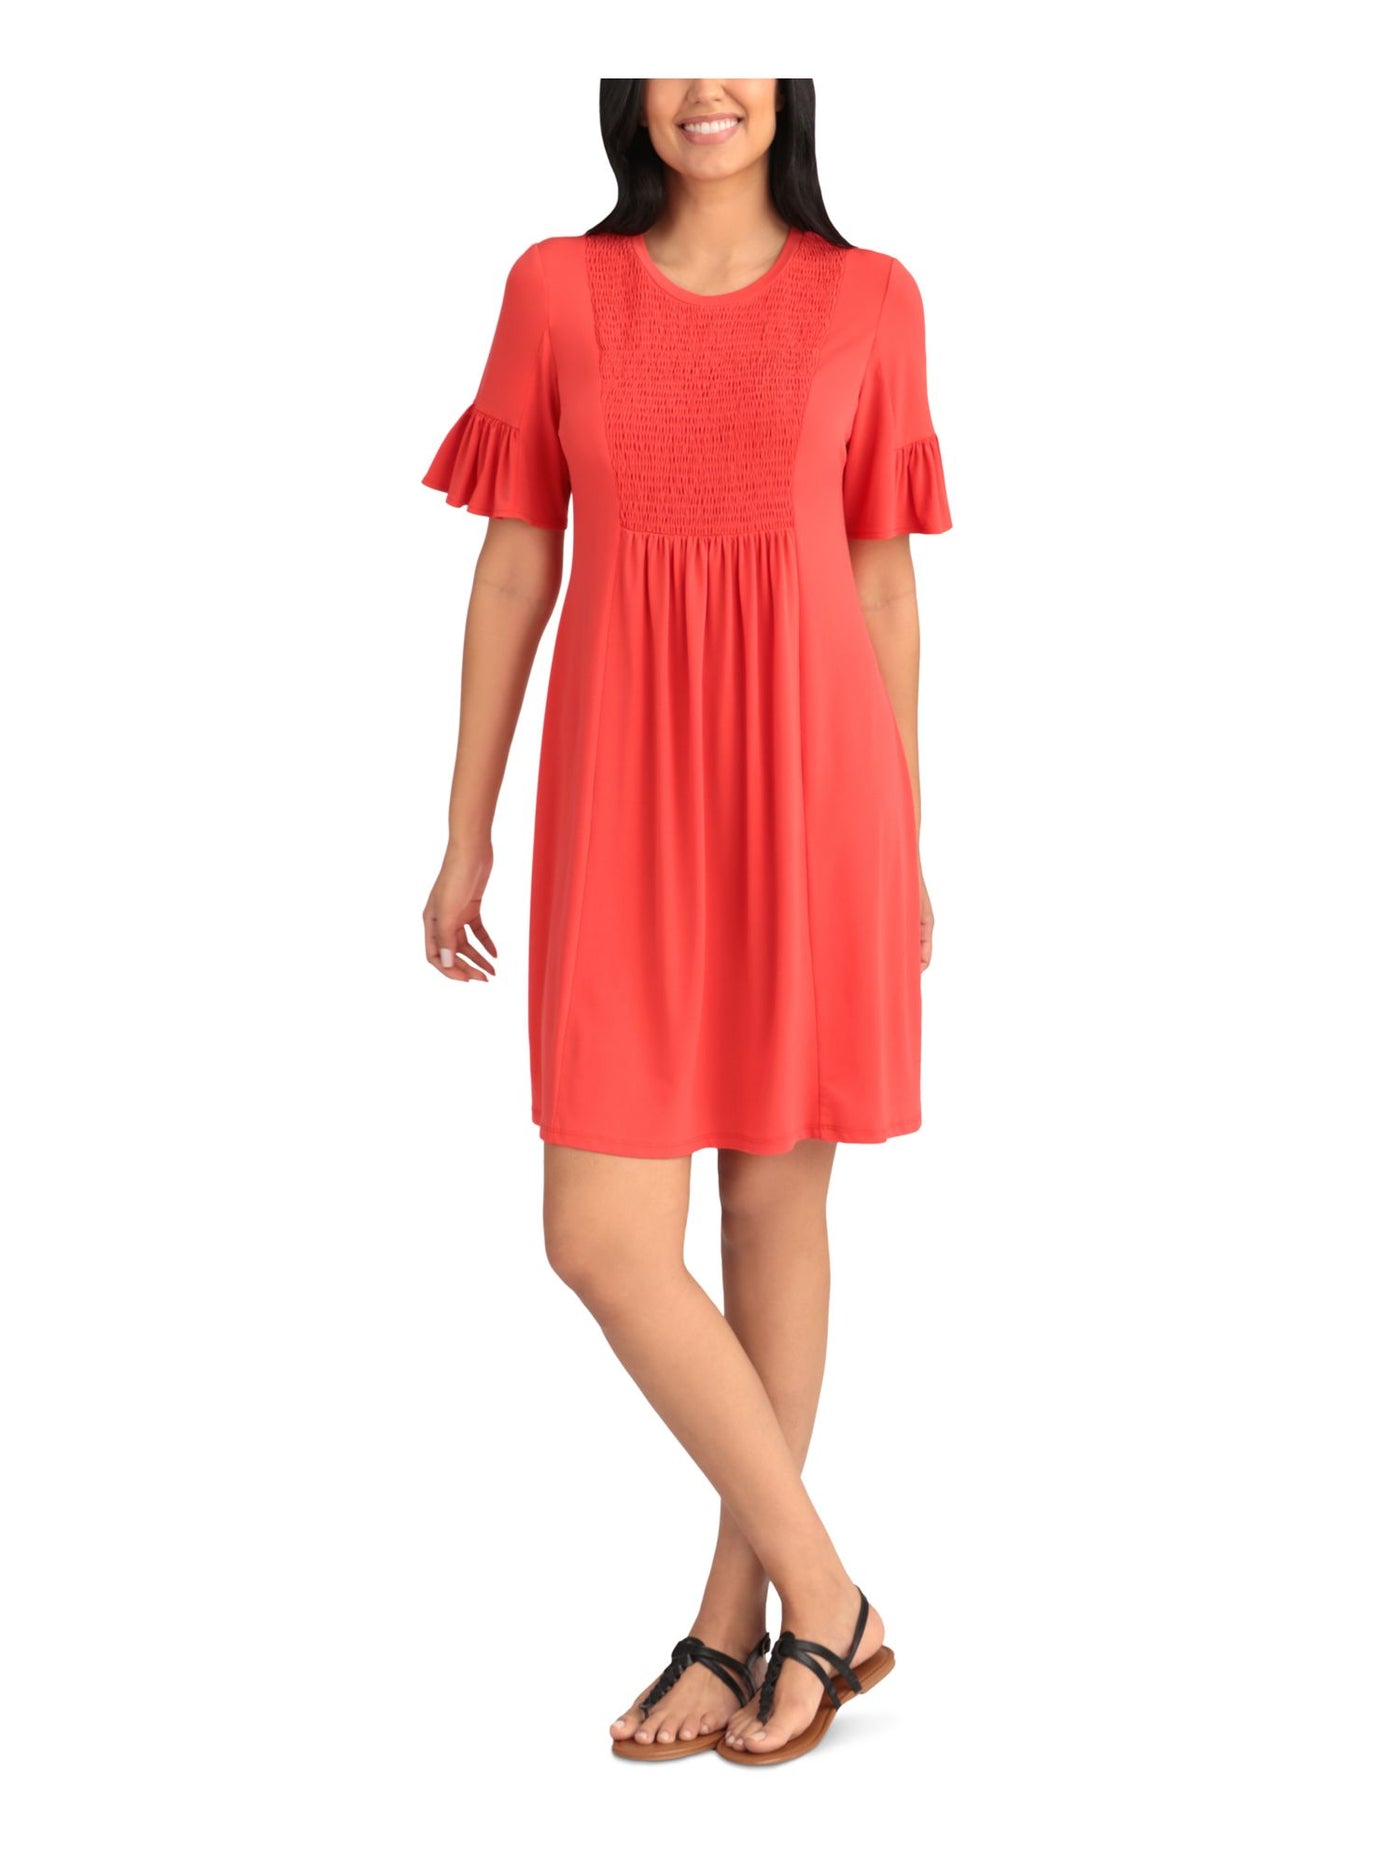 LONDON TIMES PETITES Womens Coral Stretch Smocked Ruffled Jersey-knit Short Sleeve Jewel Neck Above The Knee Shift Dress Petites 8P